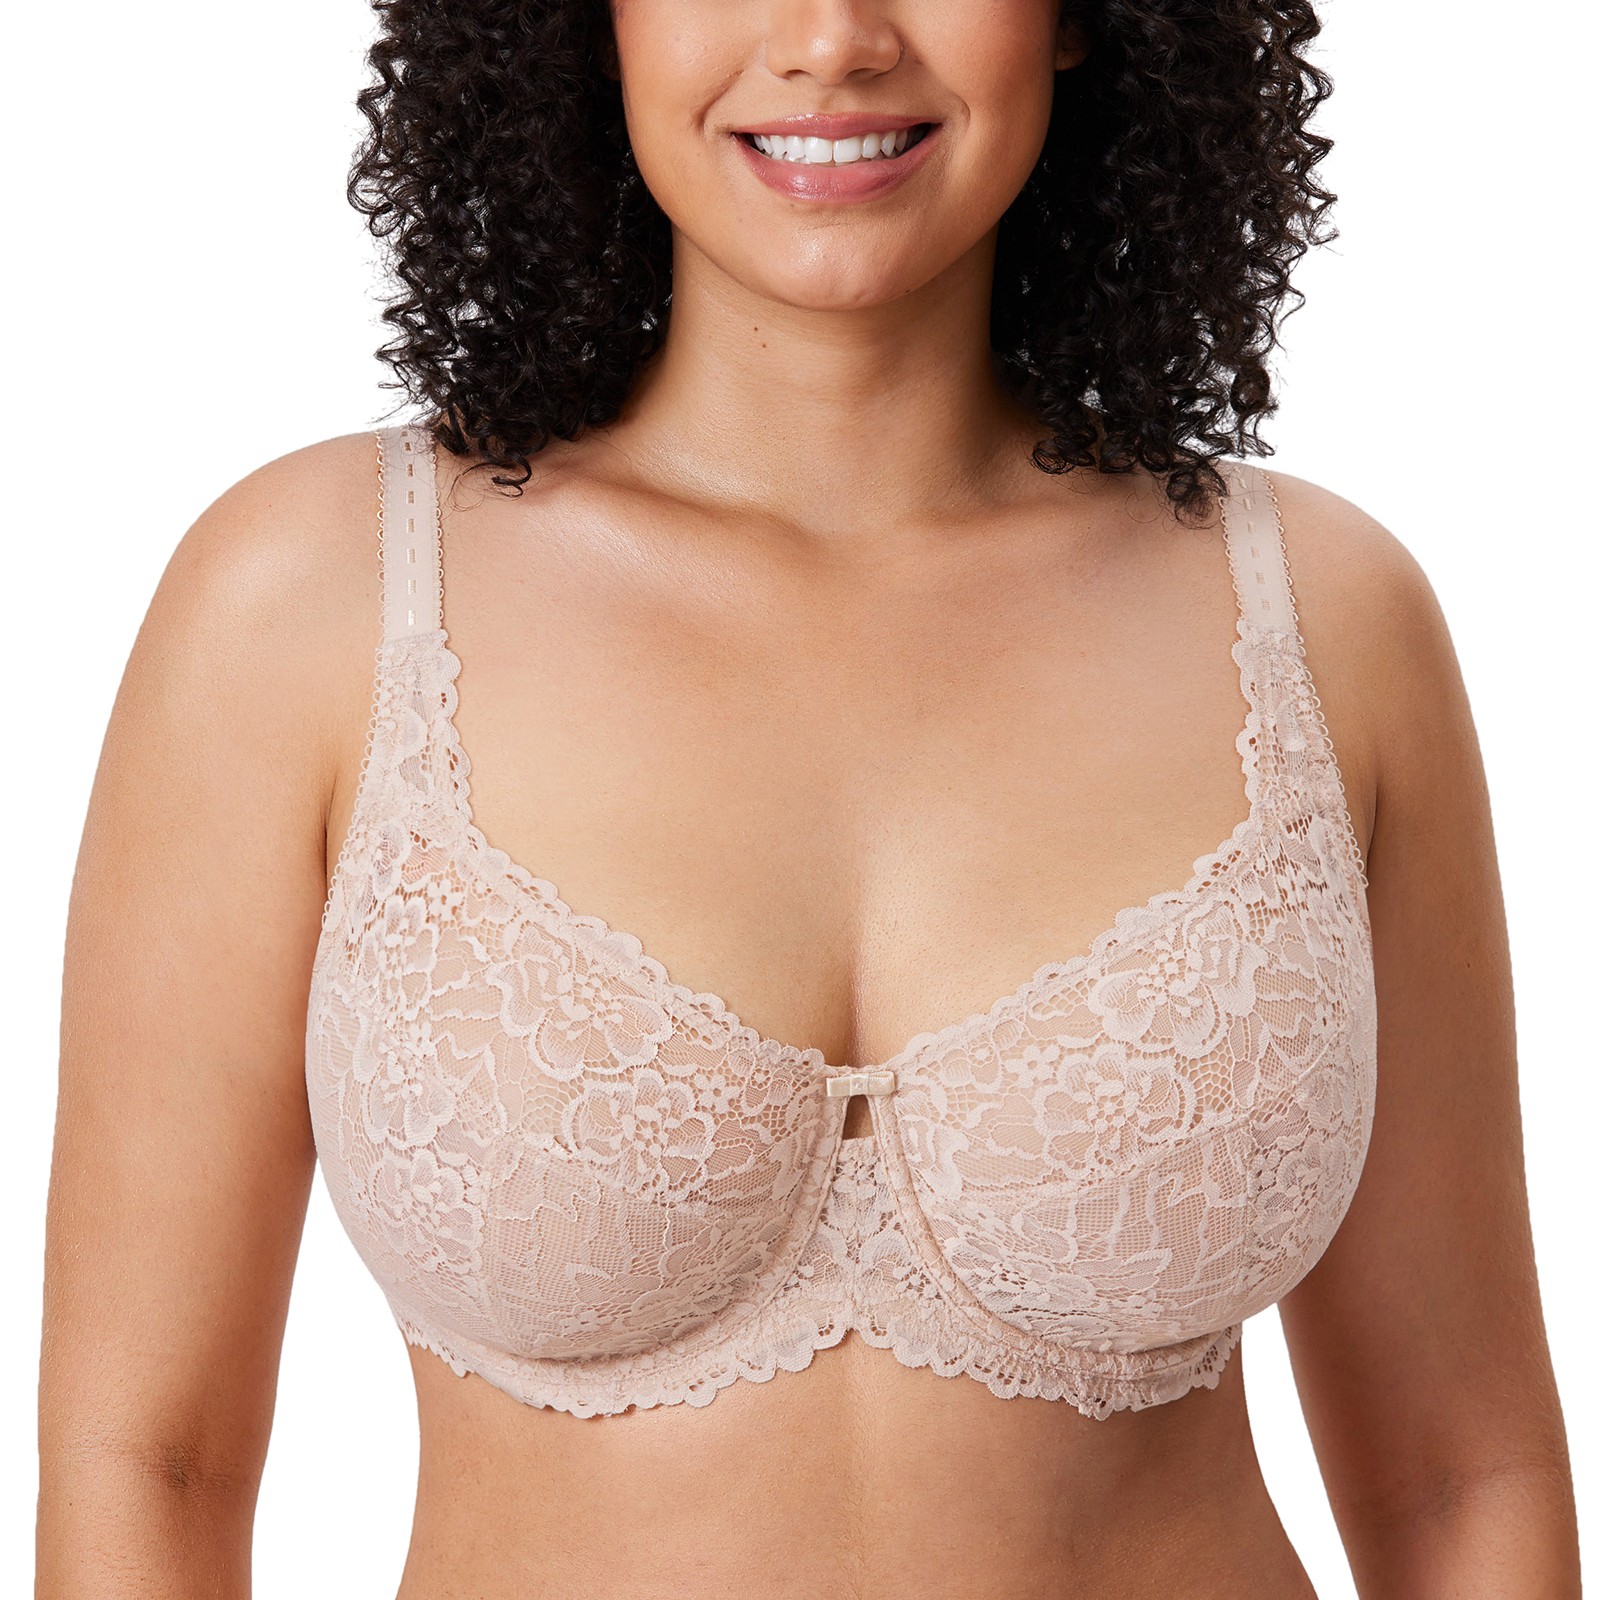 Bras DELIMIRA Womens Plus Size Full Coverage Underwire Non Padded Smooth  Lace Bra 32 48 C DD E F G H From Wochanmei, $36.78